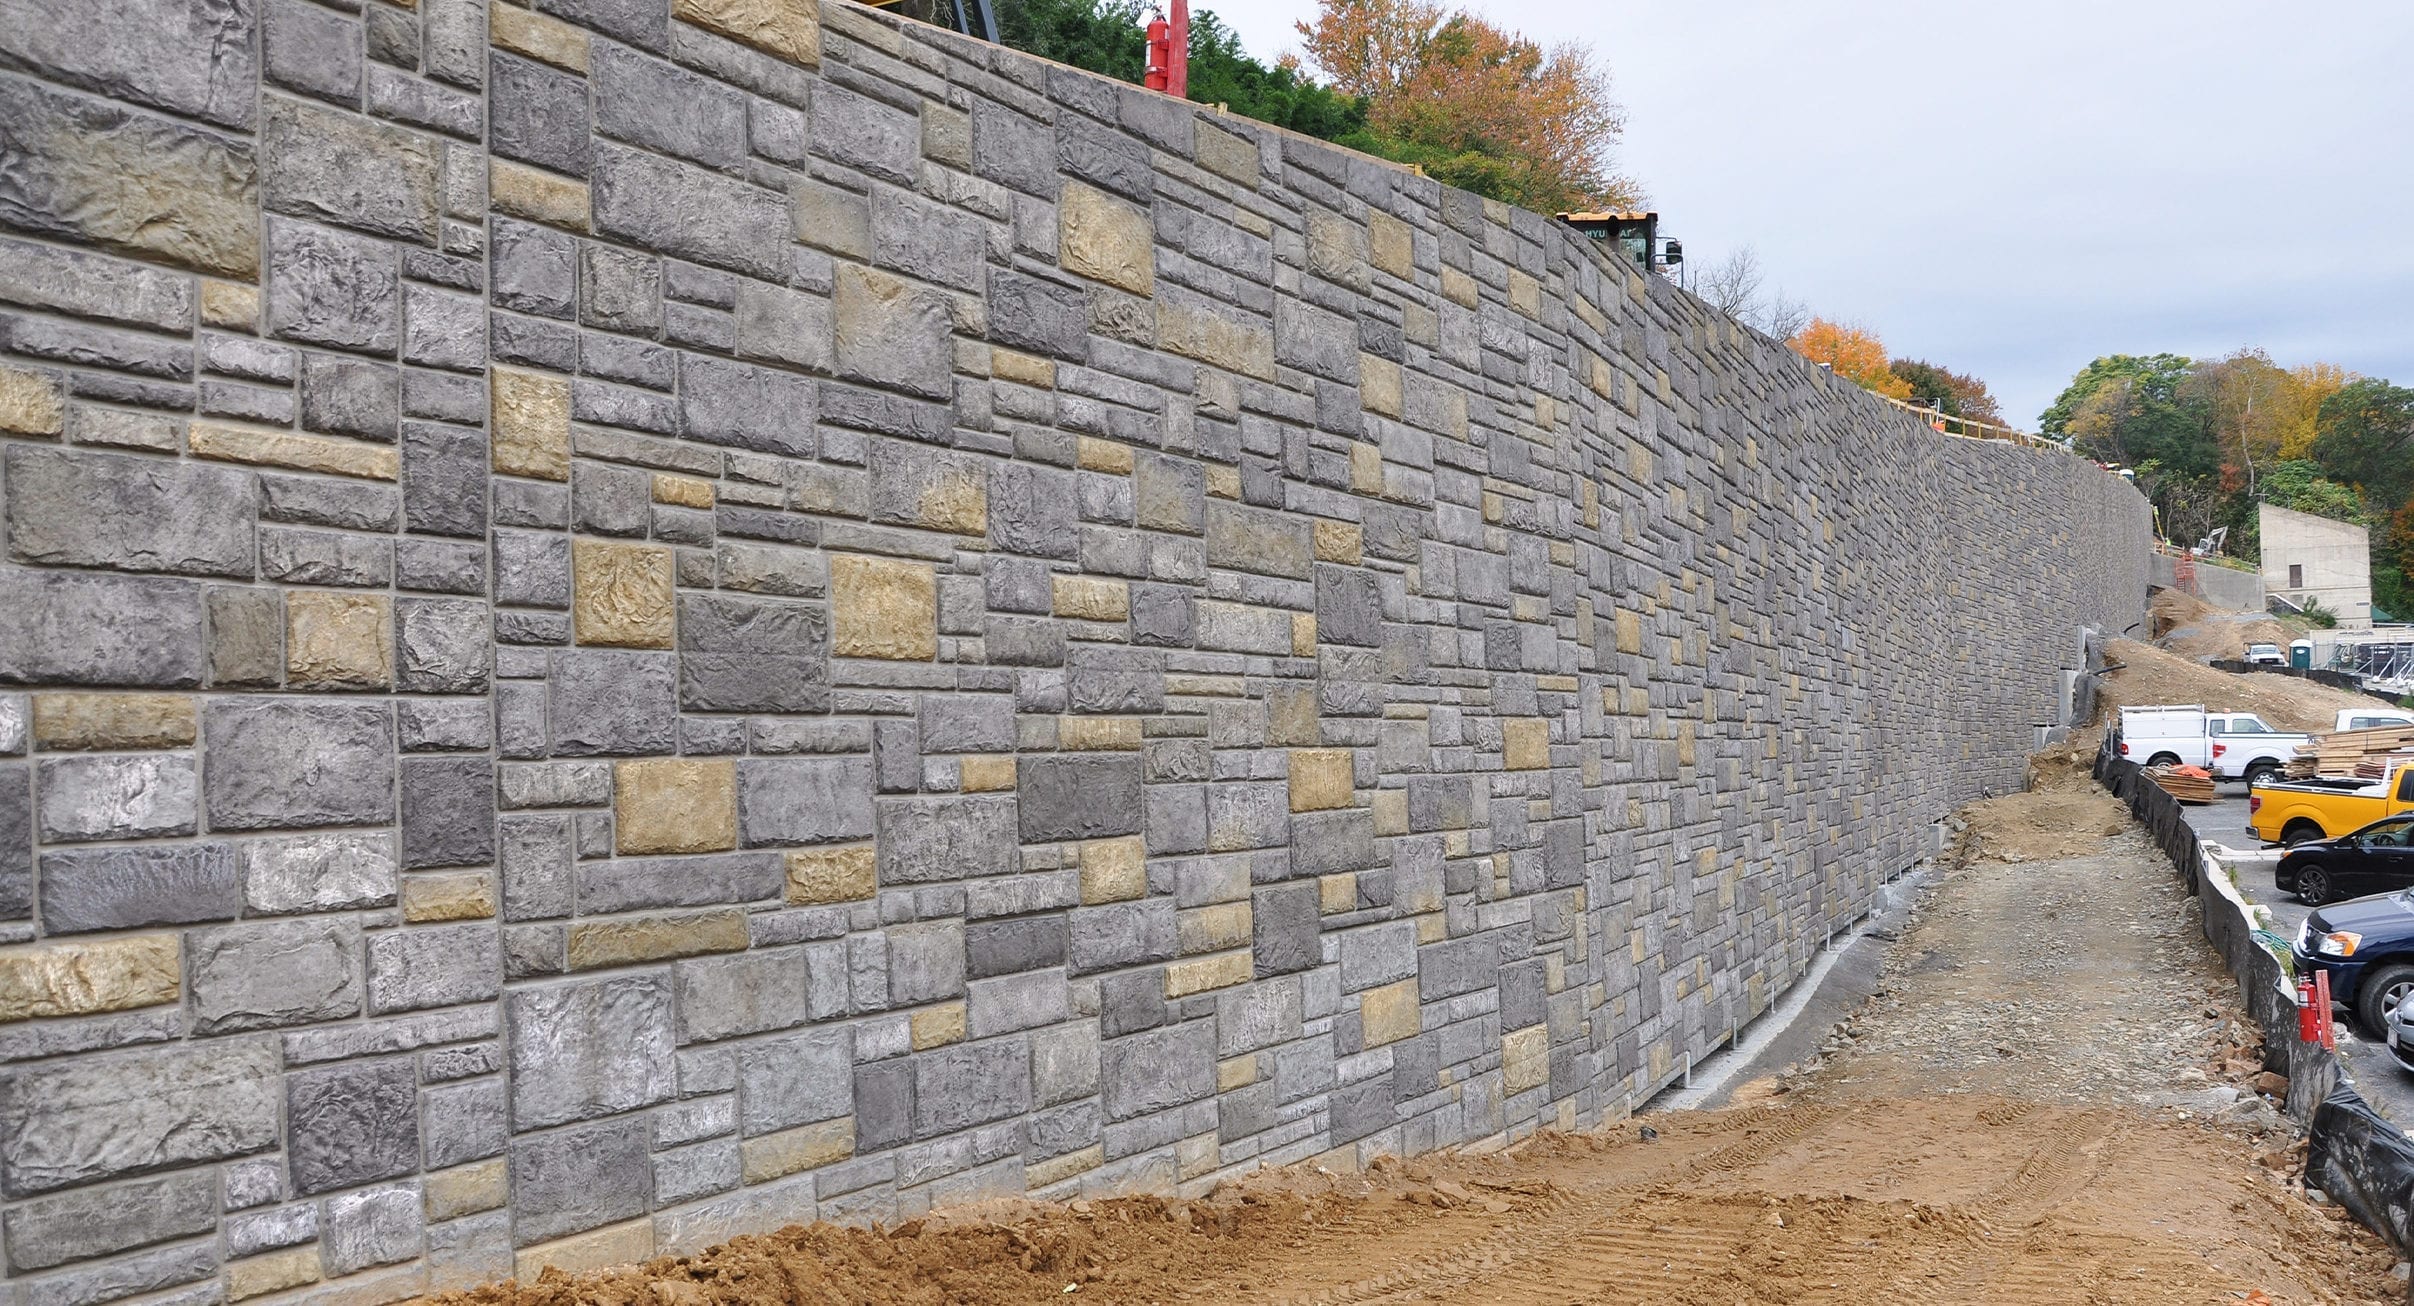 Retaining Wall at the Smithsonian Zoo